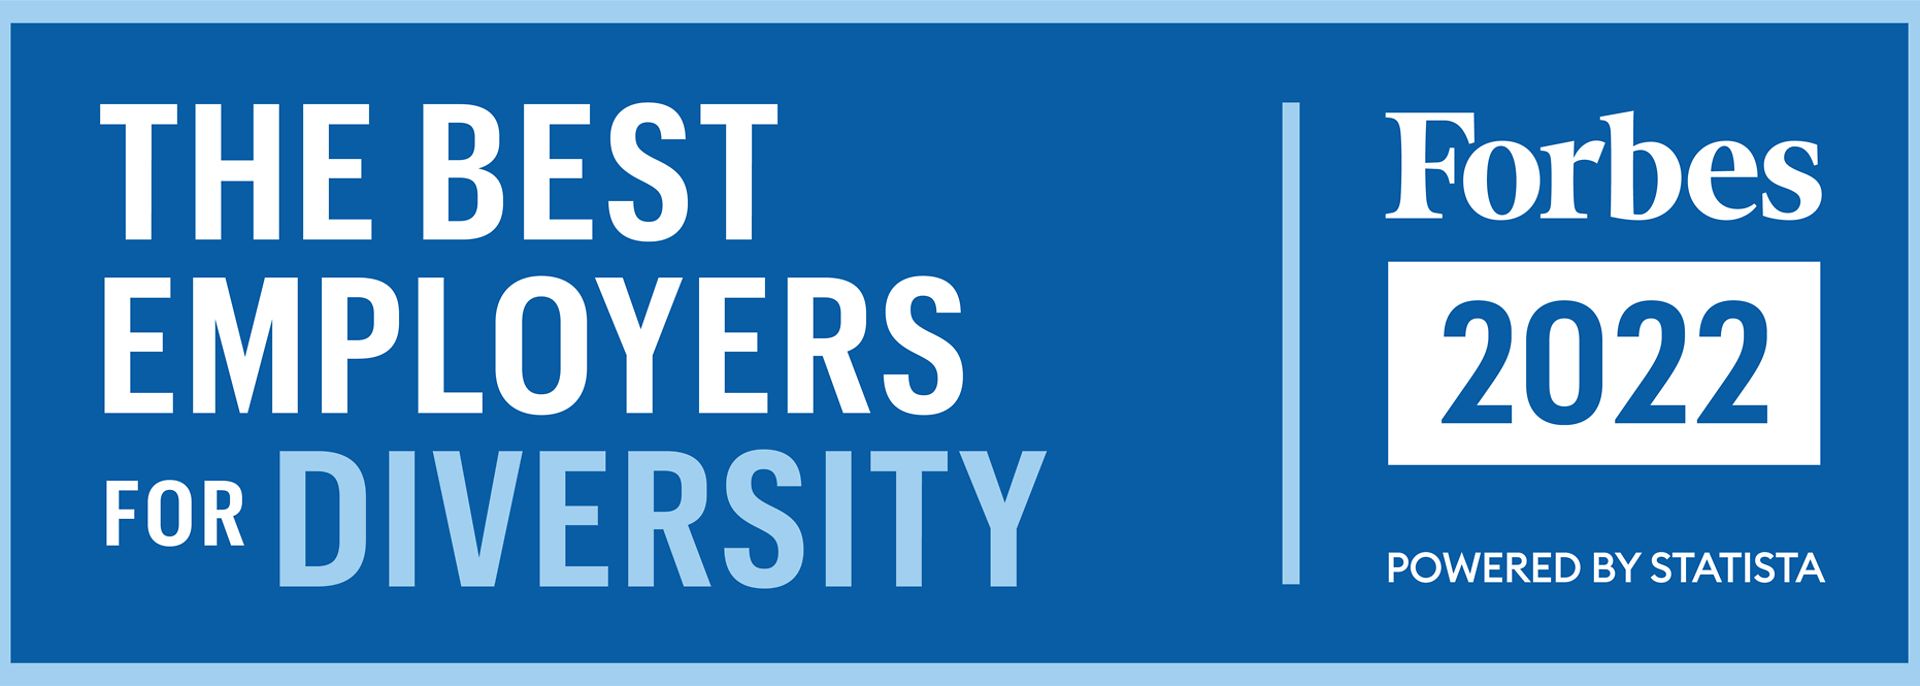 forbes-best-employers-diversity-2022-logo-color